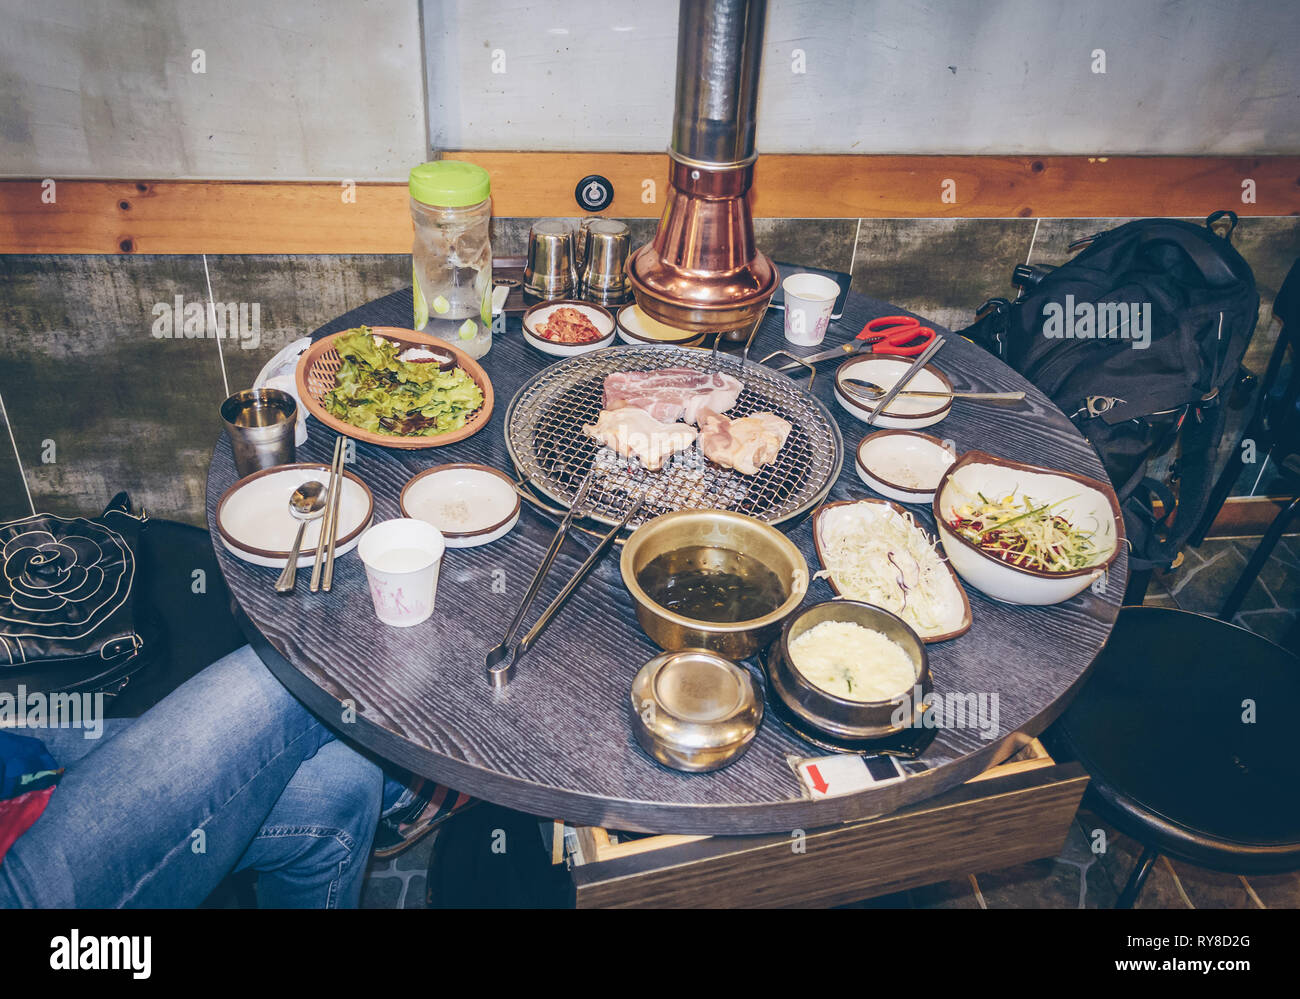 Korean Barbecue (BBQ) Table with Grill and Sides Stock Photo - Alamy